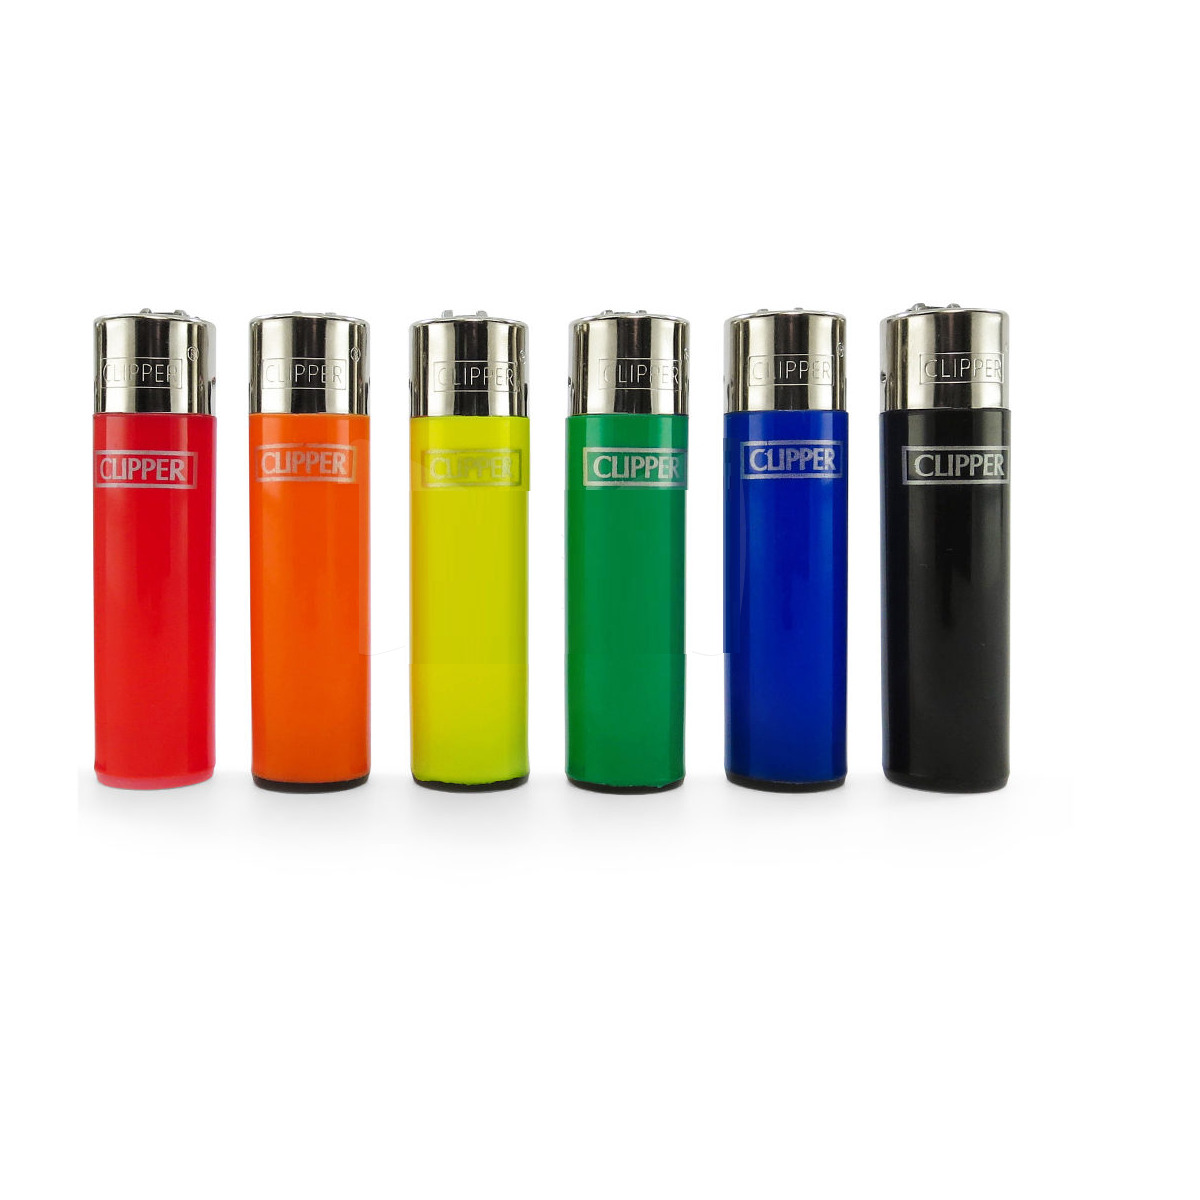 6x Clipper Solid Colors Lighters - Removable Flint Assorted Colors 